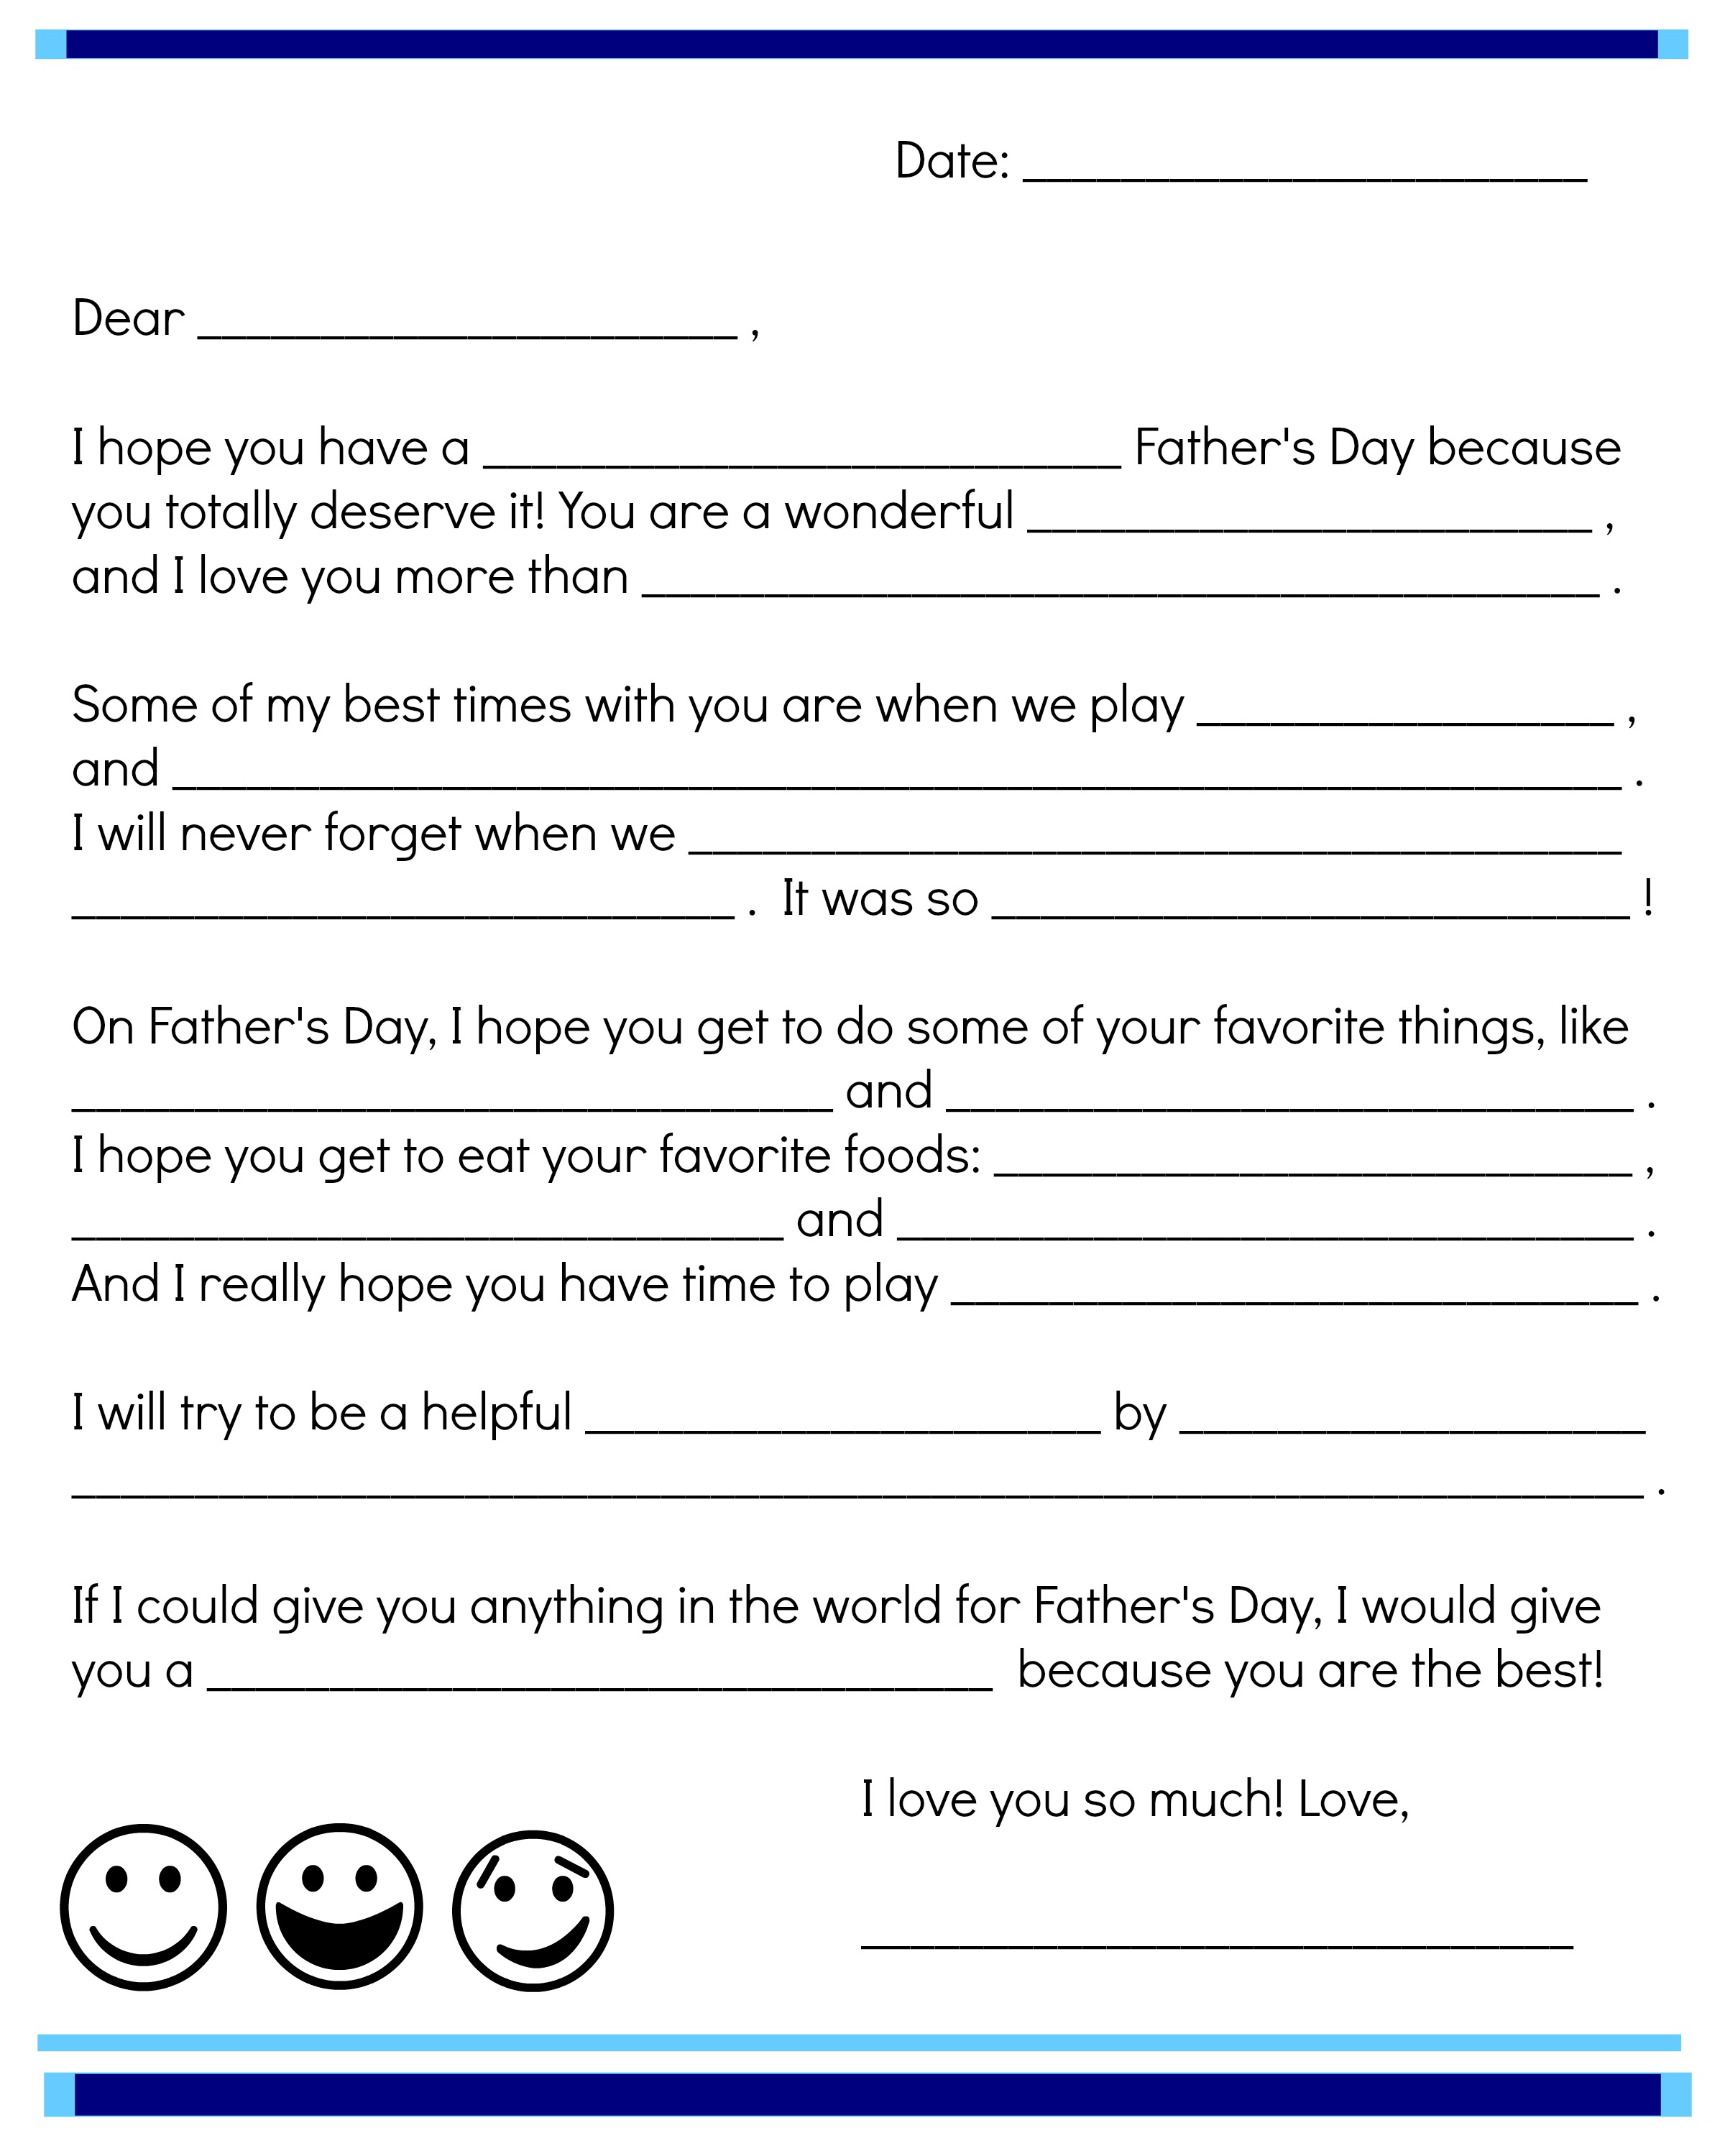 Father s Day Fill In Note Printable